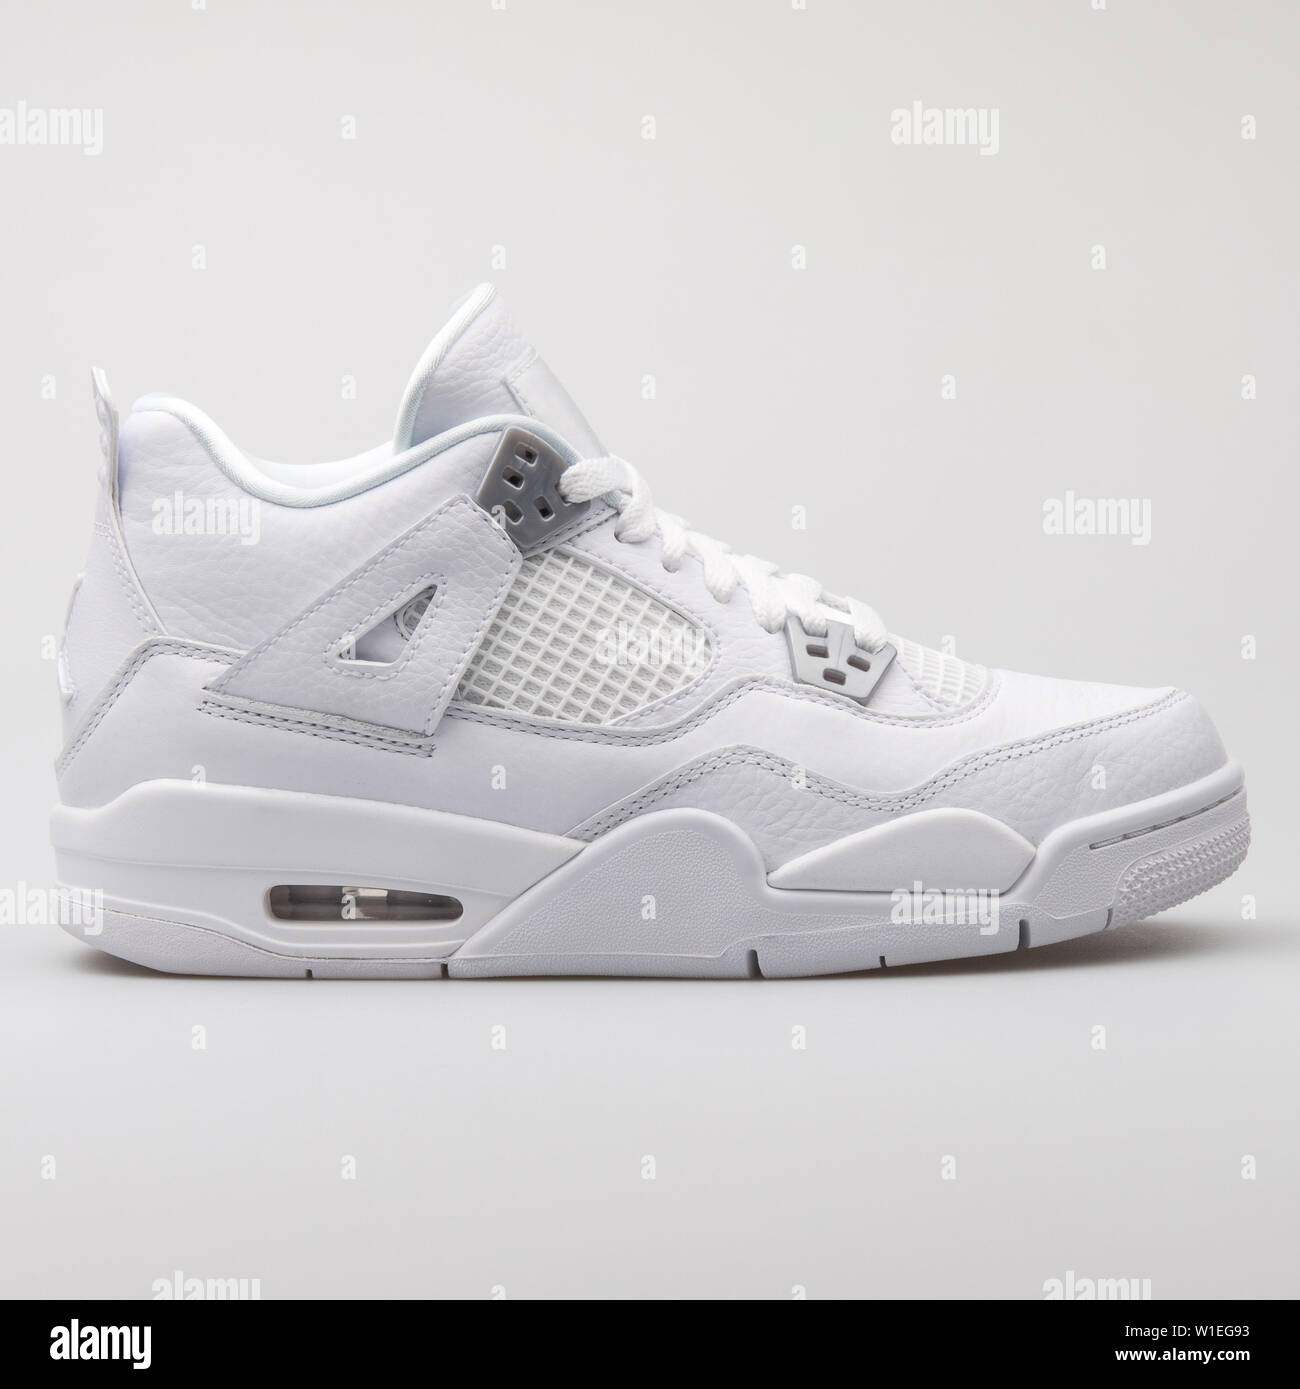 Air Jordan 4 High Resolution Stock Photography and Images - Alamy